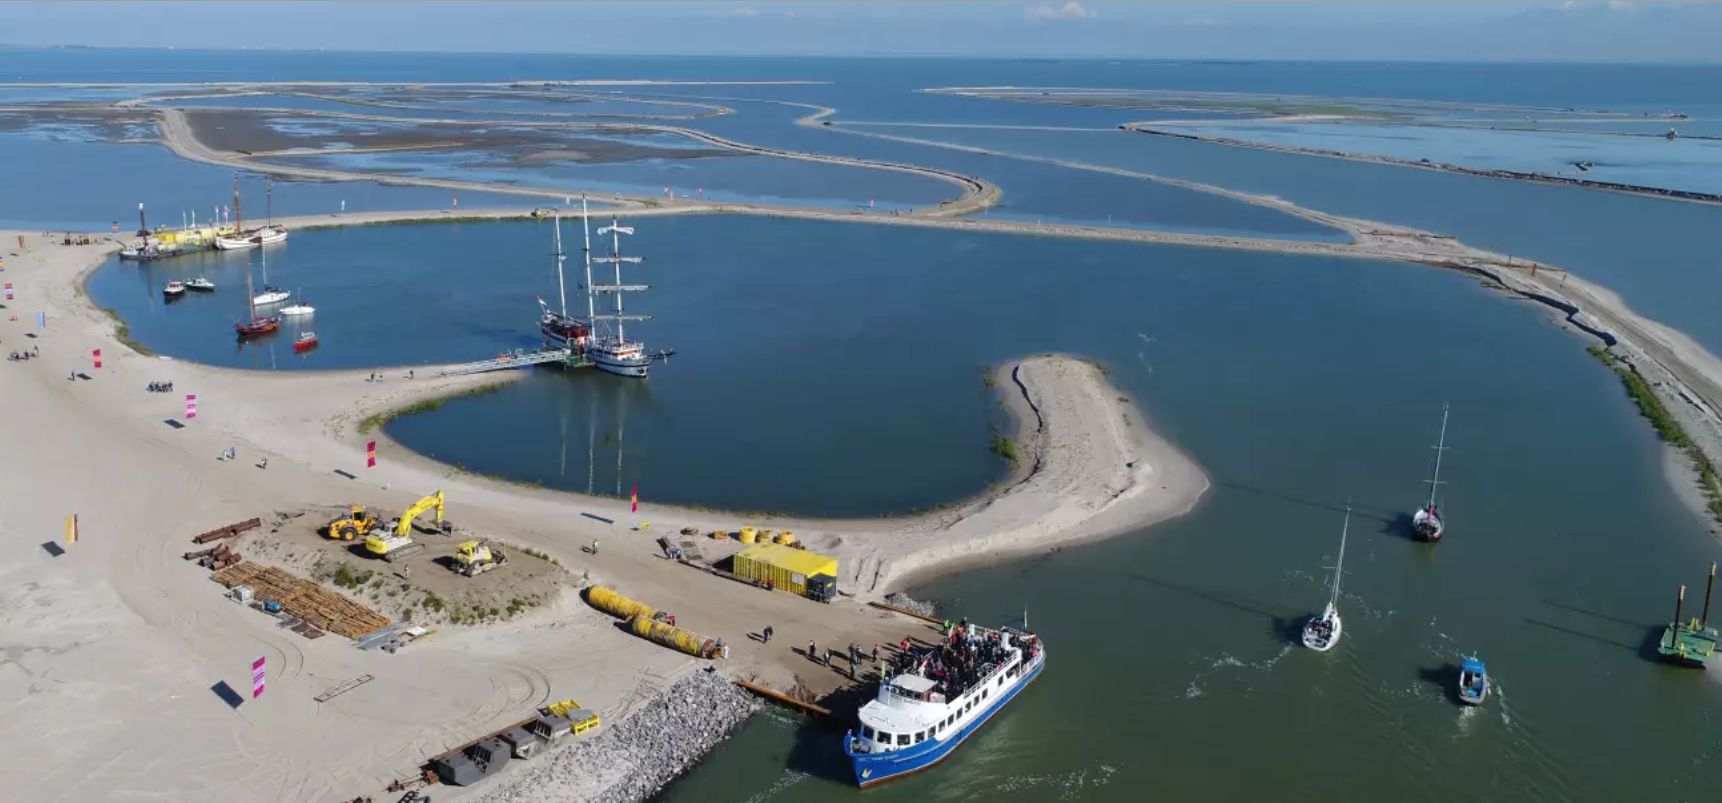 As one of Europe’s largest, most ambitious and most innovative nature restoration initiatives, Marker Wadden is working to boost biodiversity and reconnect people with wild nature. 